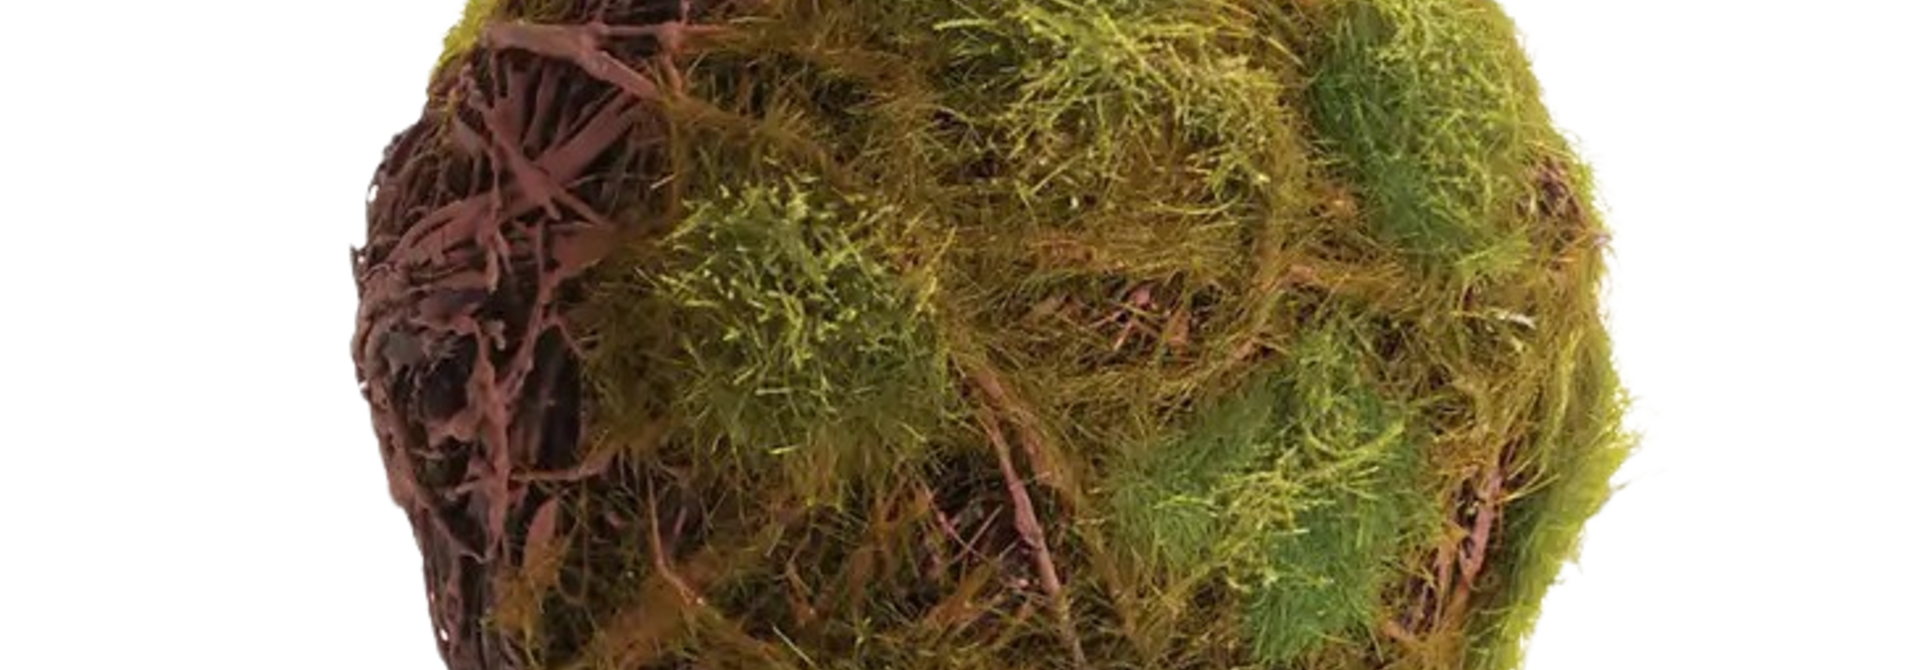 Moss Orb | The Filler Collection, 4.5 Inch x 4.5 Inch x 4.5 Inch